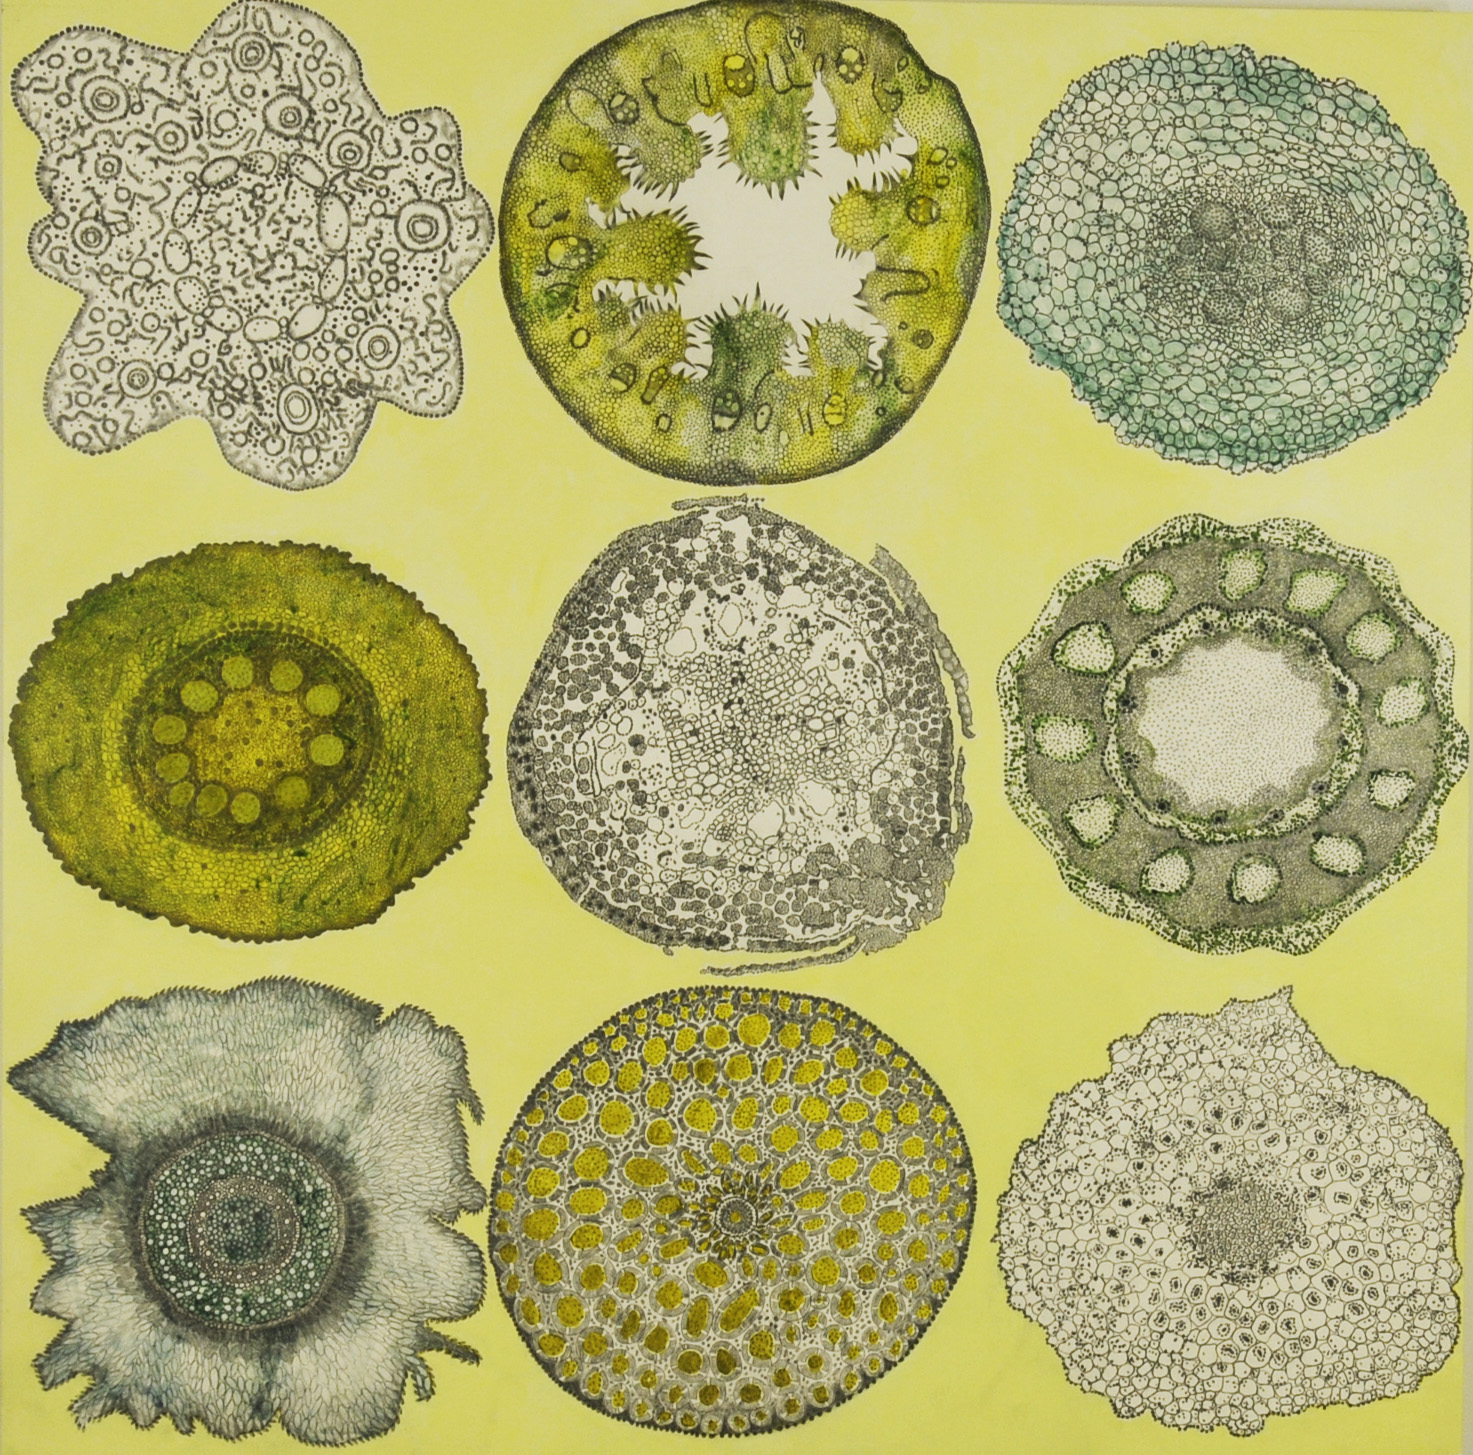   Plant Cell Patterns #1, acrylic and graphite on panel, 30x30   